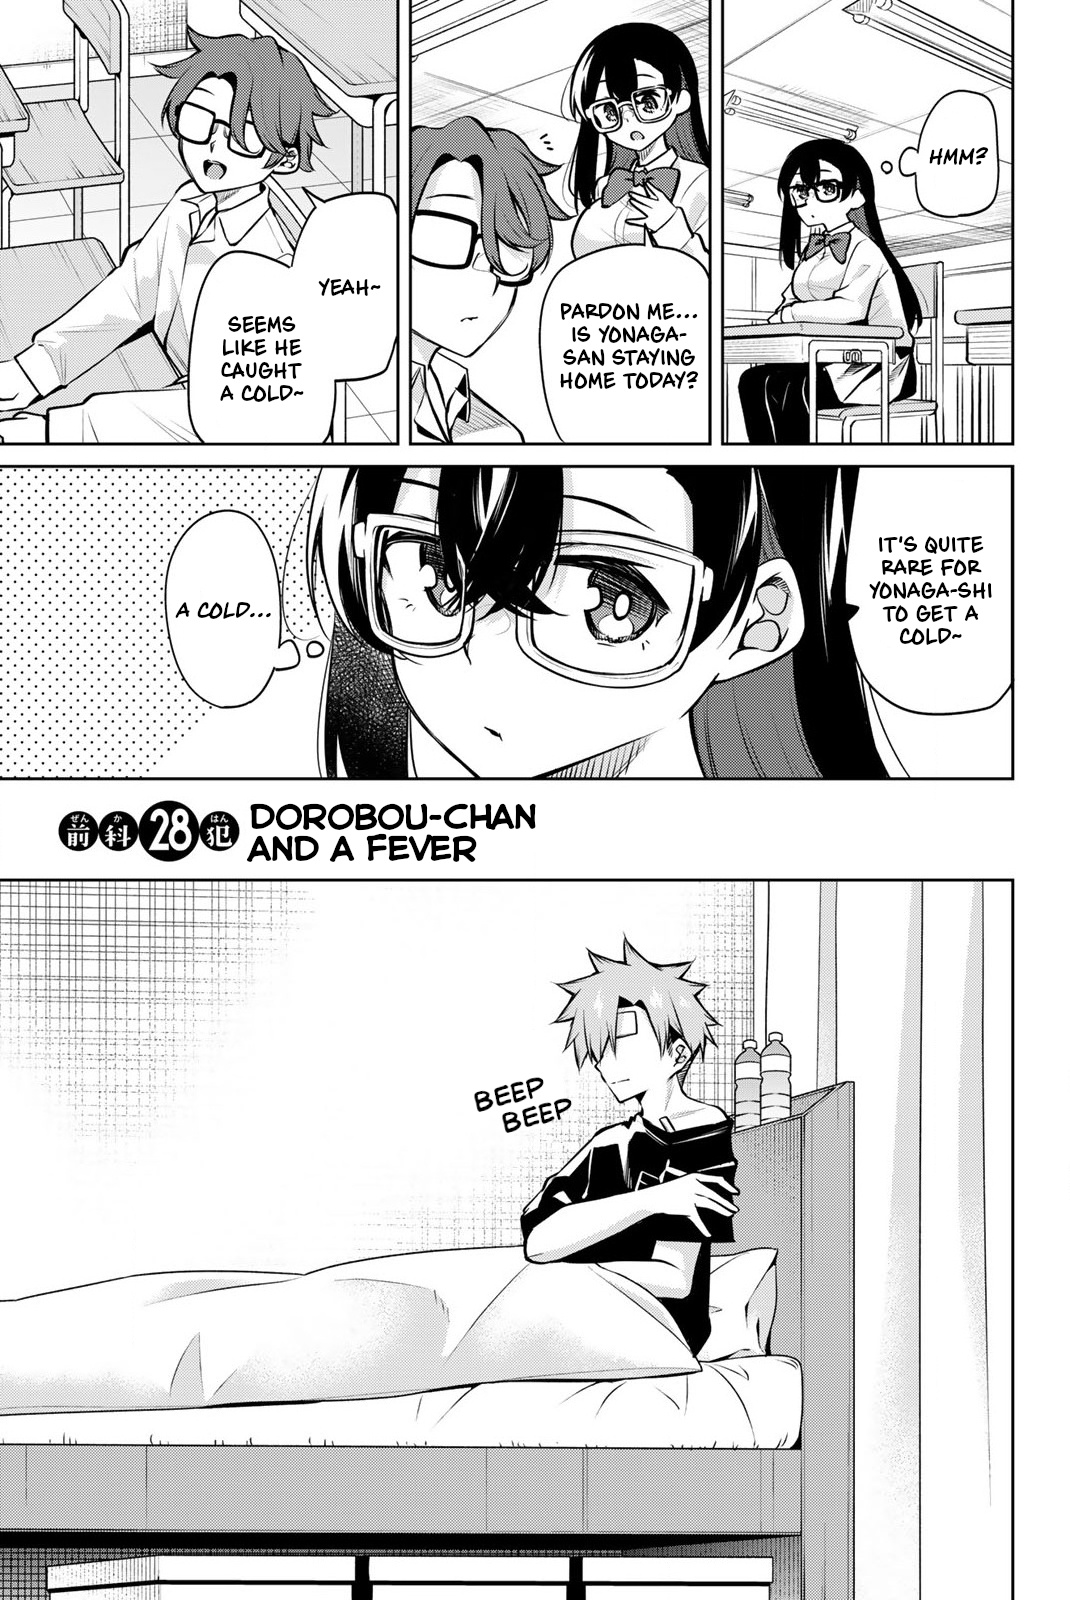 Dorobou-Chan Vol.3 Chapter 28: Dorobou-Chan And A Fever - Picture 1